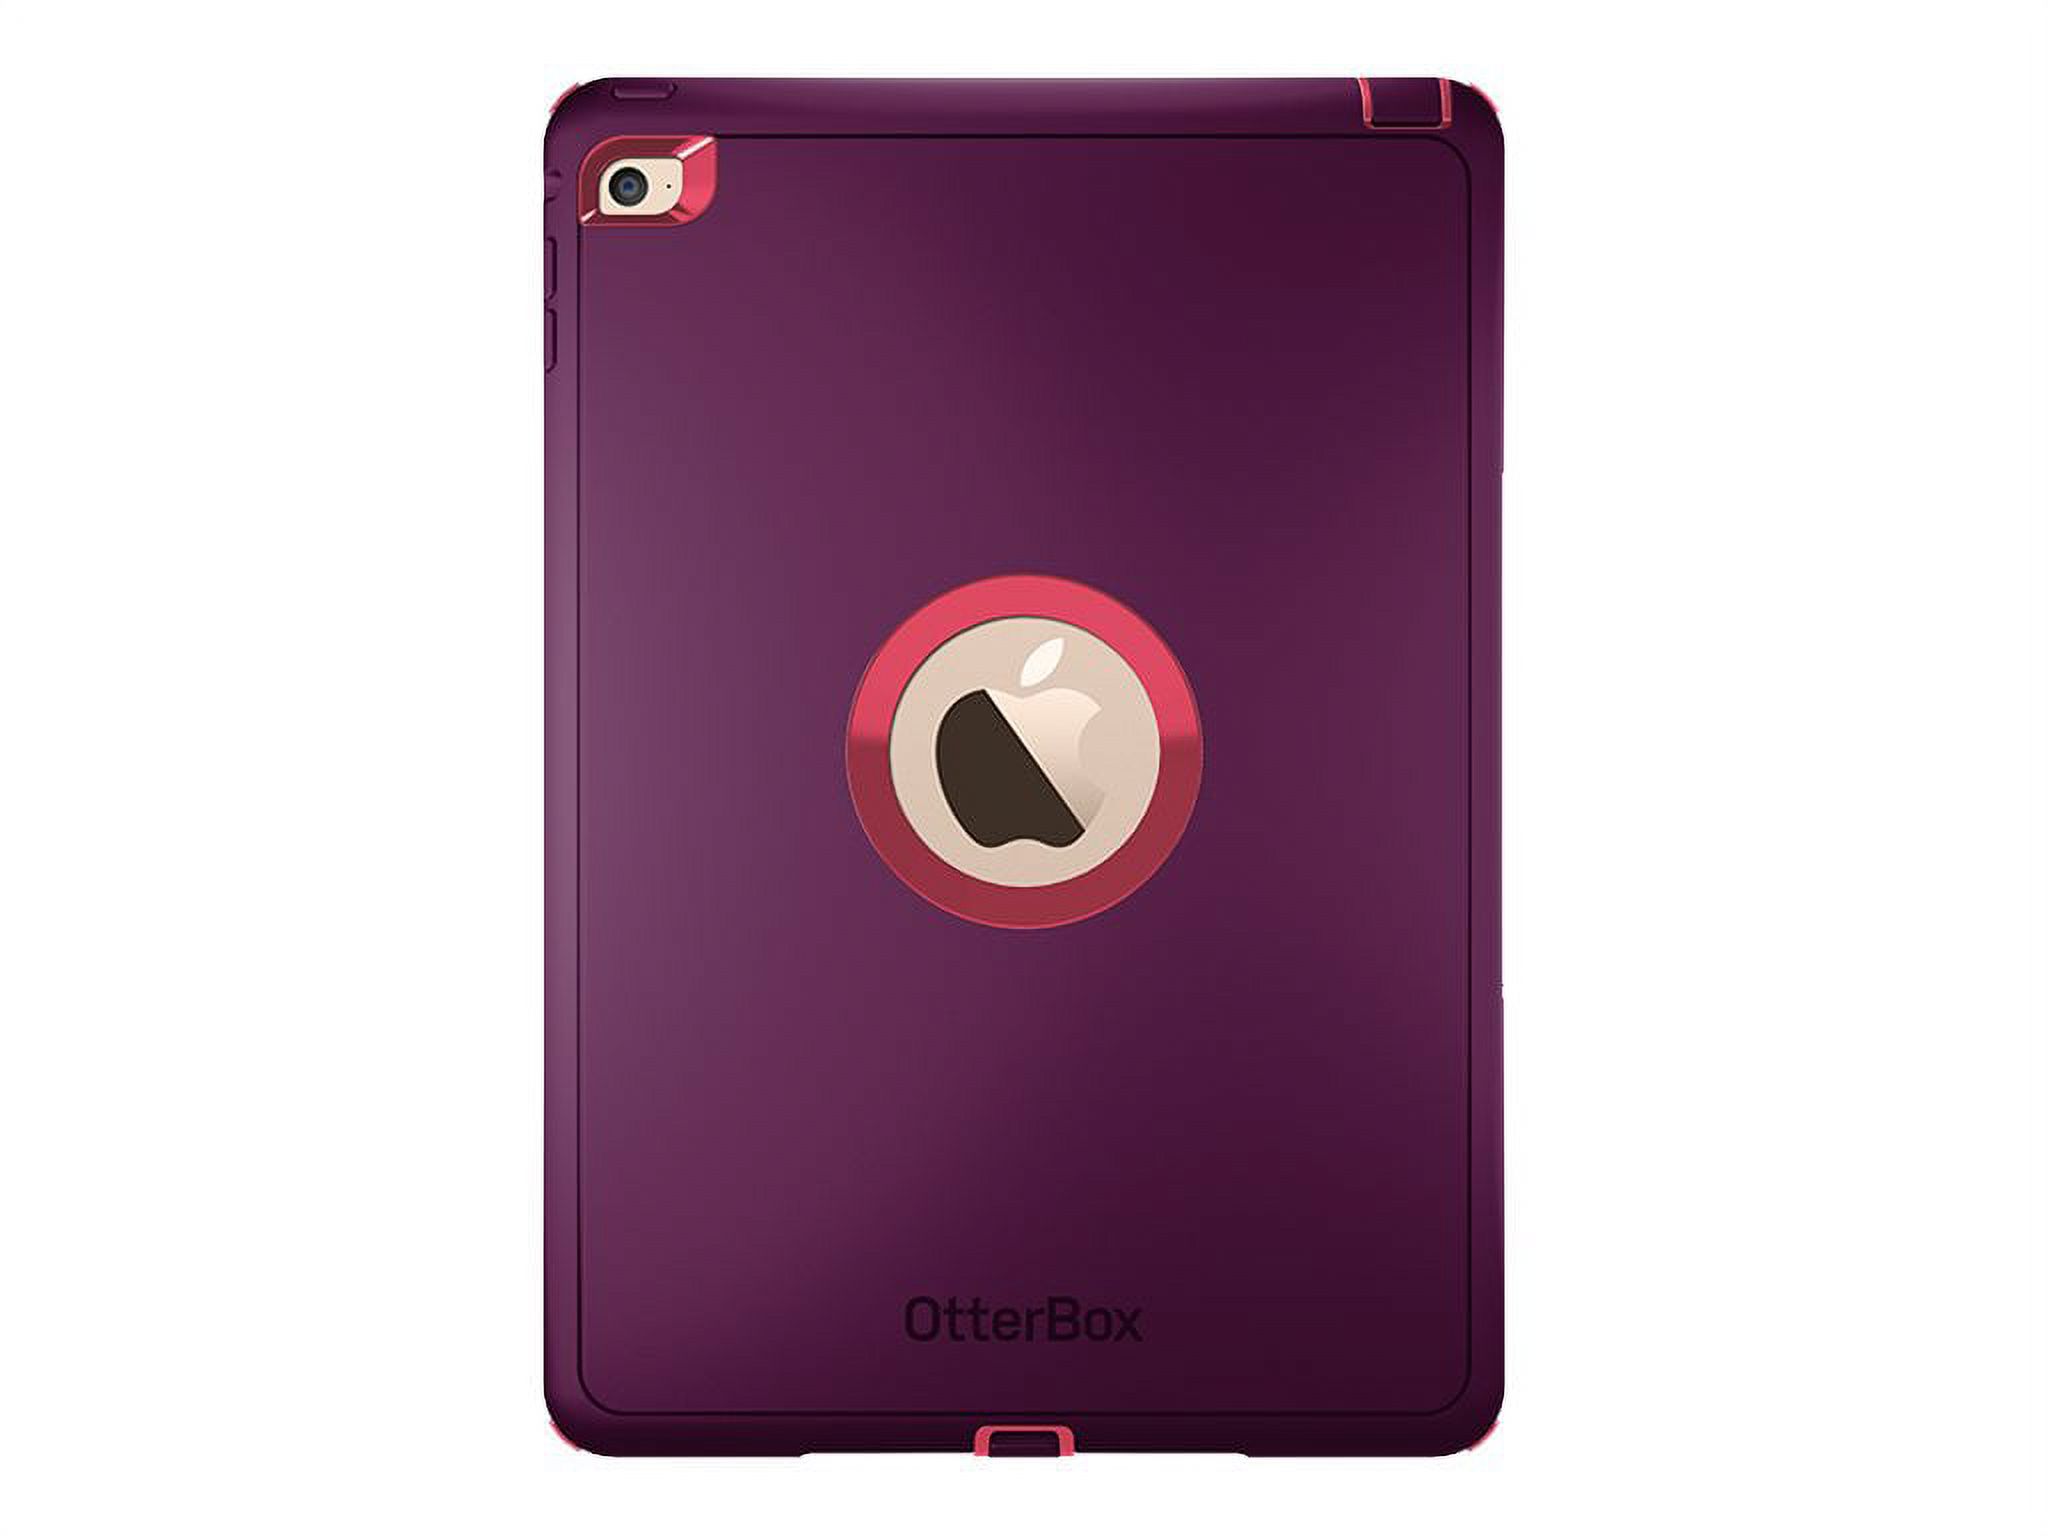 OtterBox Defender Series Case for iPad Air 2 - image 1 of 6